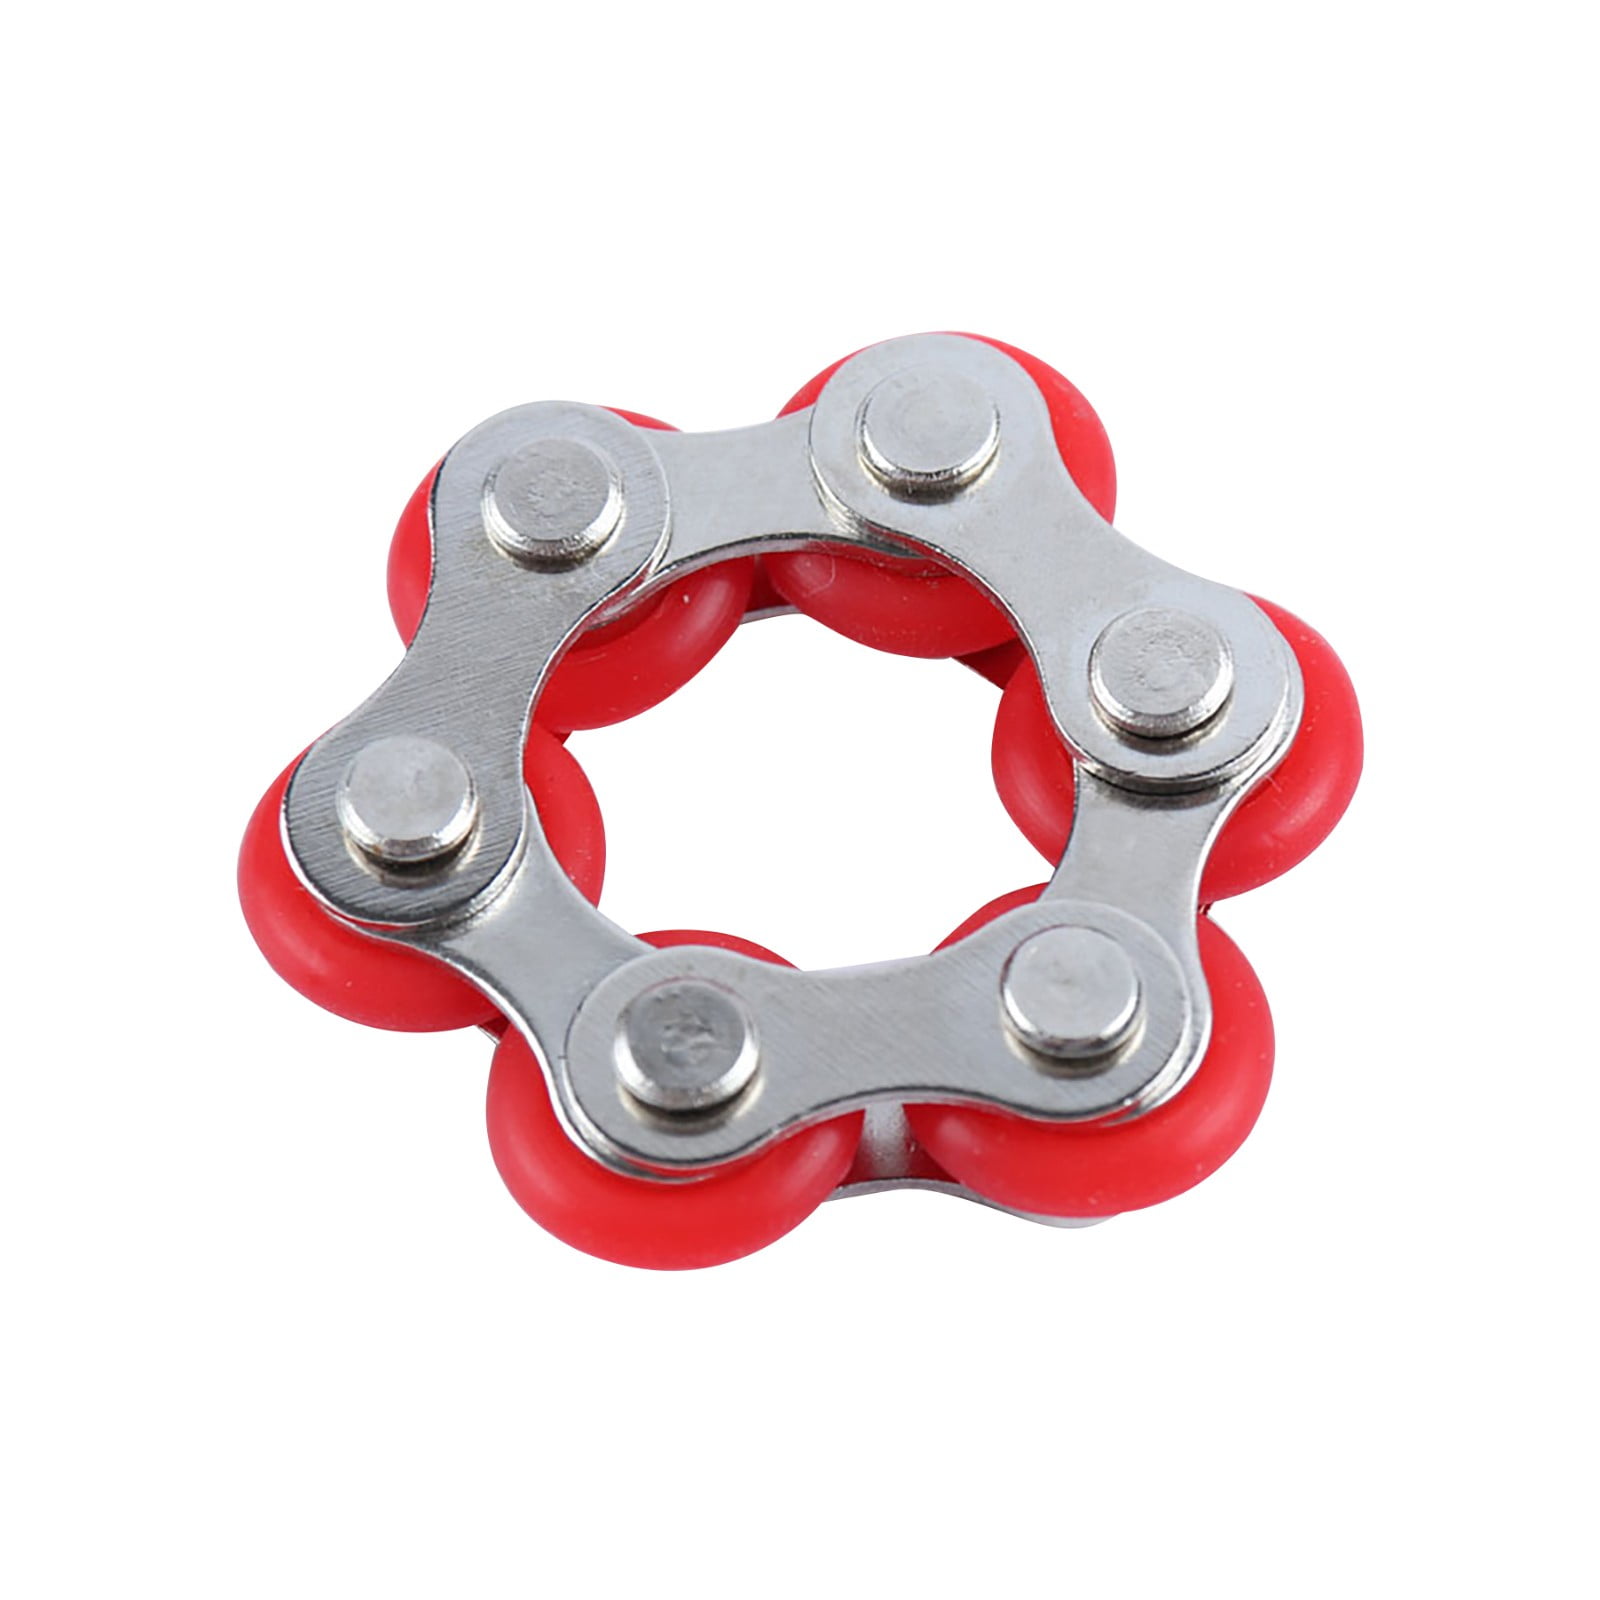 Details about   Hot Mini Hand Spinner Fidget Bicycle Chain Cross Key Ring Focus Finger Toys 